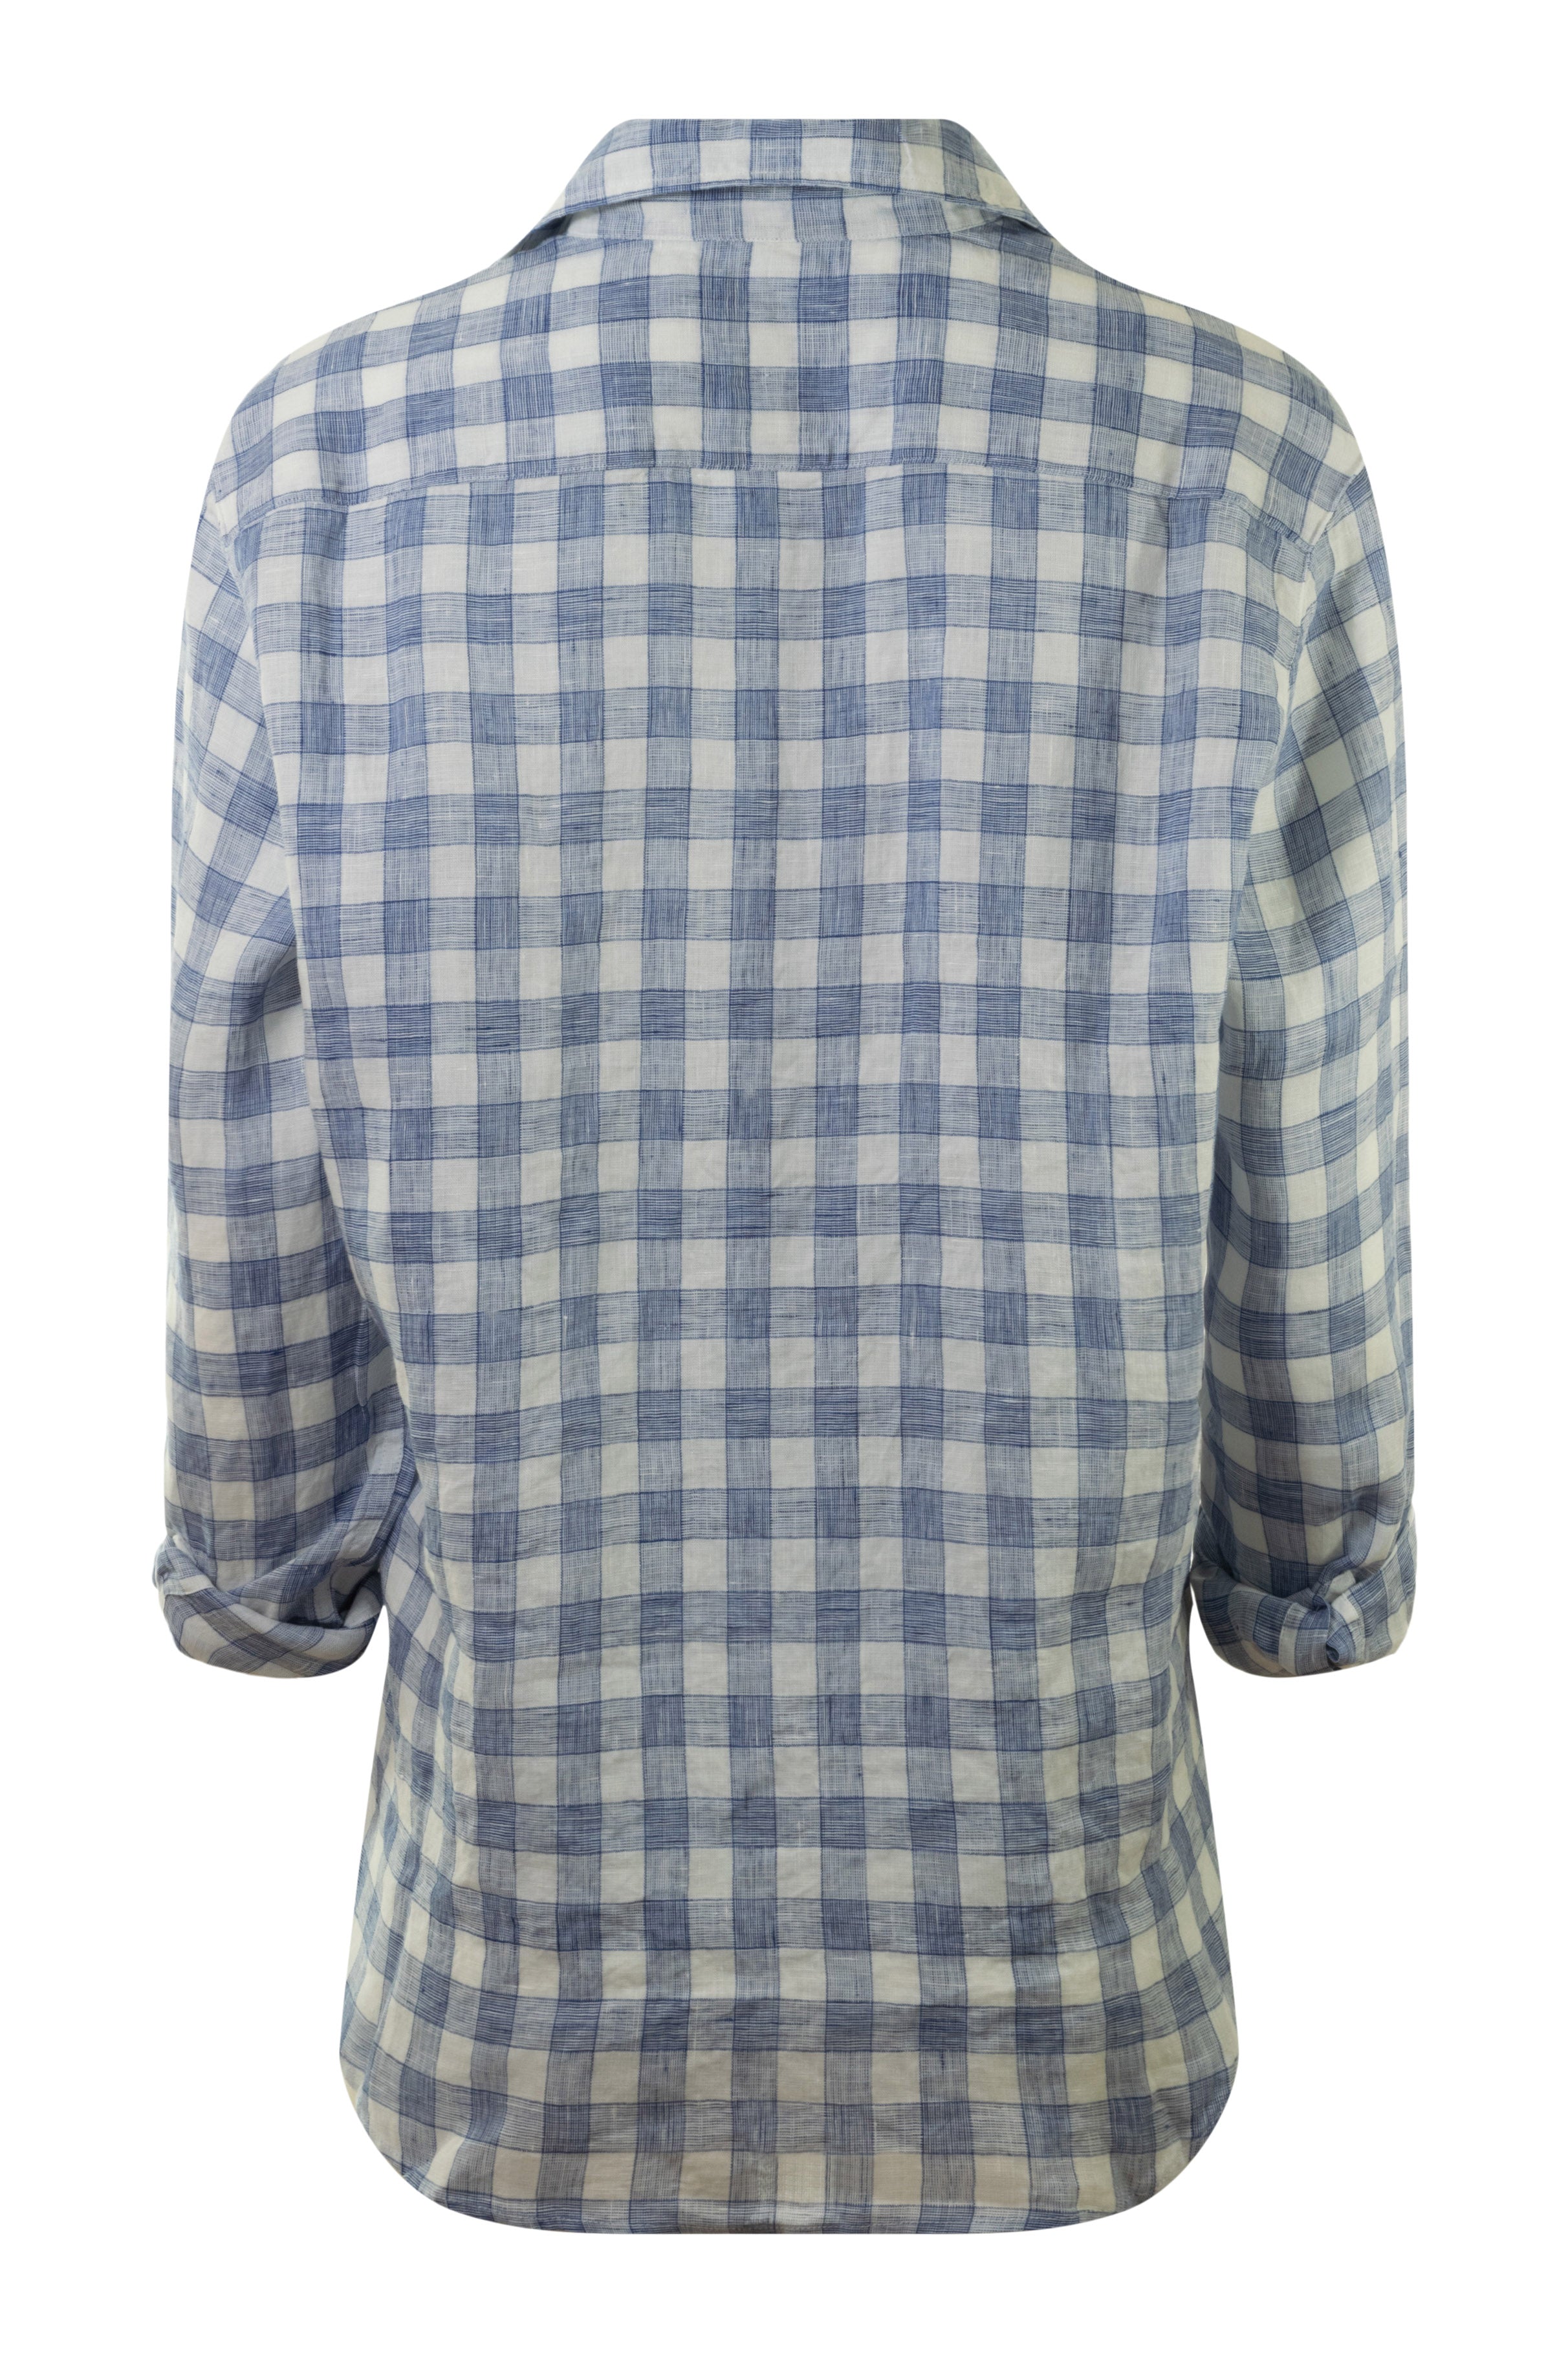 Frank & Eileen Eileen Relaxed Button Up Shirt in White, Blue Textured Check